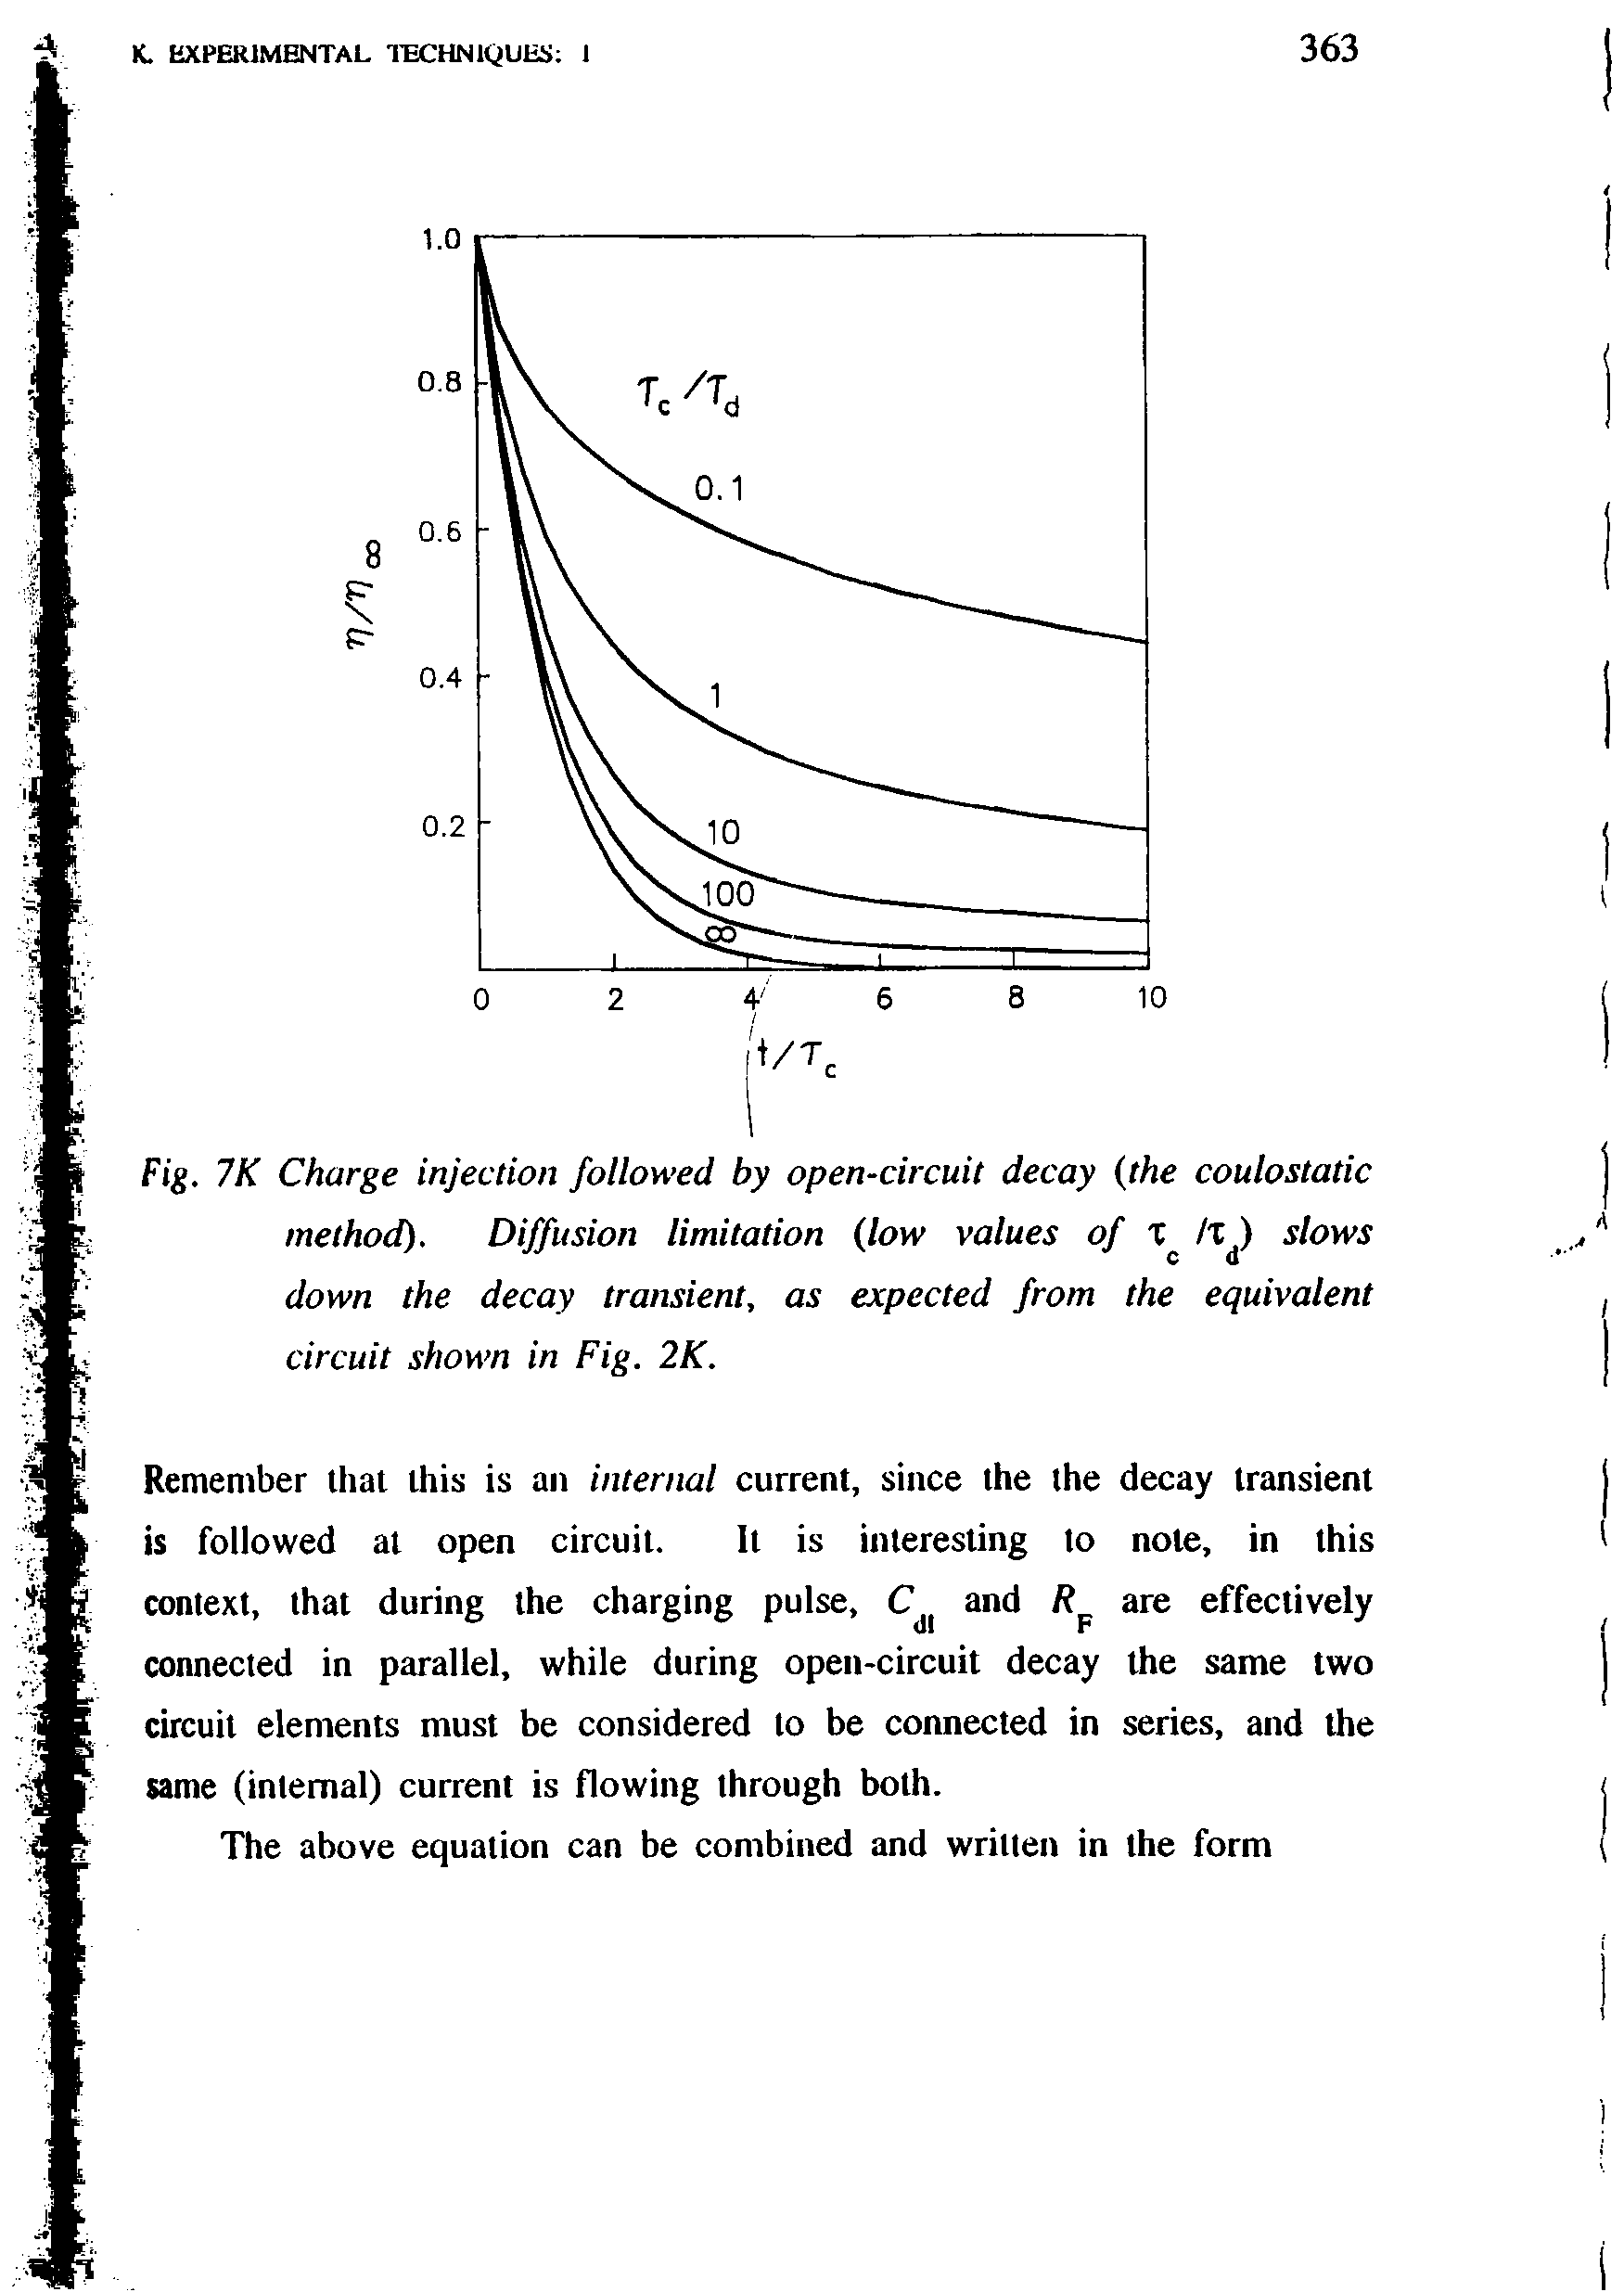 Fig. 7K Charge injection followed by open-circuit decay (the coulostatic method). Diffusion limitation (low values of /x ) slows down the decay transient, as expected from the equivalent circuit shown in Fig. 2K.